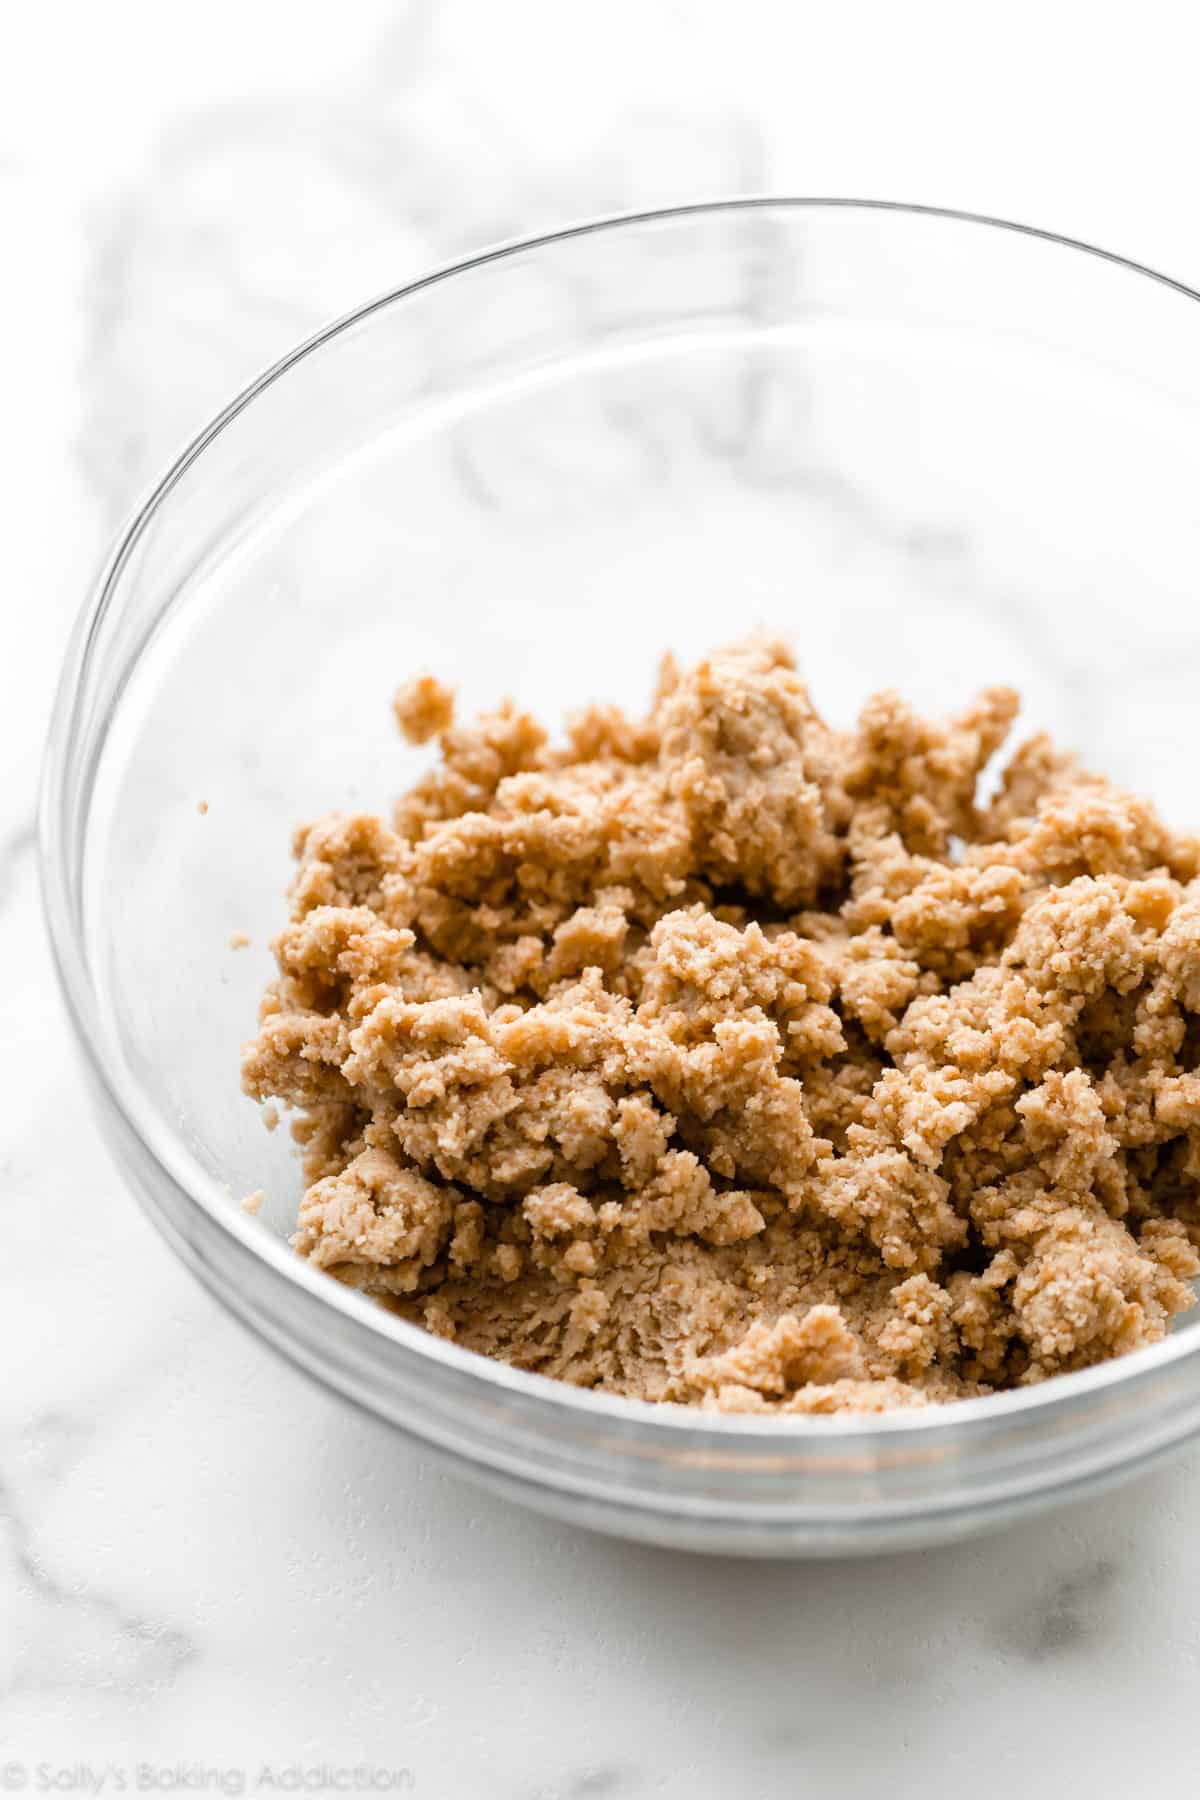 No bake peanut butter bars mixture in glass bowl